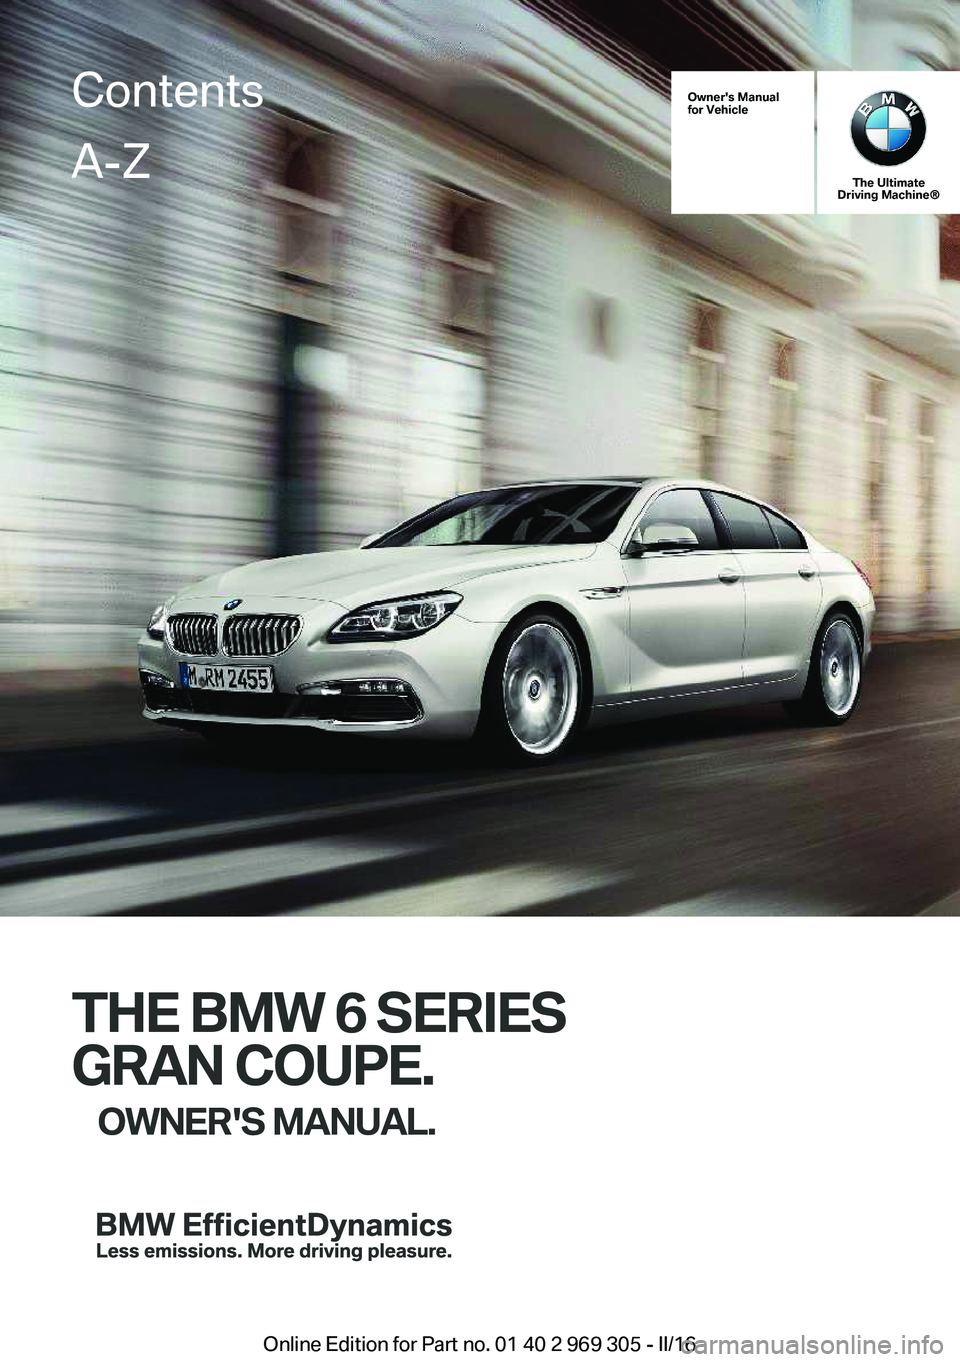 BMW 6 SERIES GRAN COUPE 2017  Owners Manual Owner's Manual
for Vehicle
The Ultimate
Driving Machine®
THE BMW 6 SERIES
GRAN COUPE. OWNER'S MANUAL.
ContentsA-Z
Online Edition for Part no. 01 40 2 969 305 - II/16   